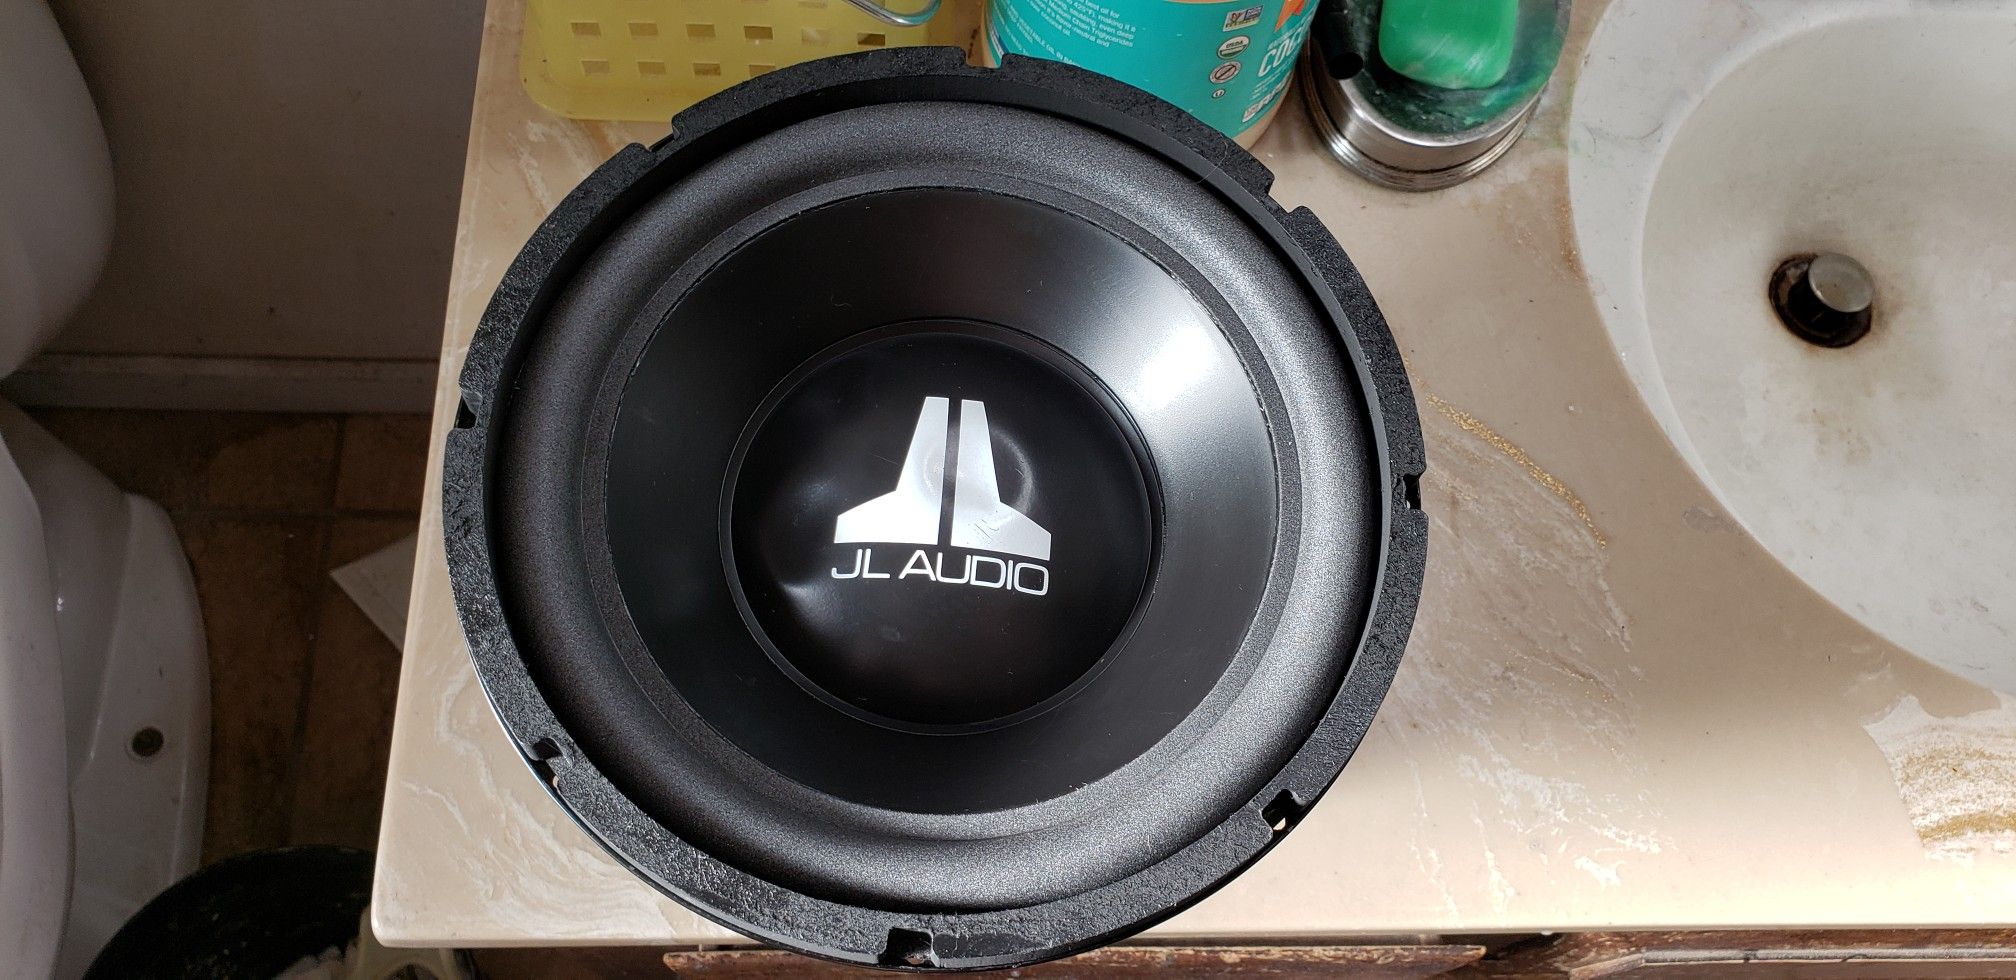 Jl Audio 10w3v1 Old School Excellent Condition For Sale In Pleasant Hill Ca Offerup